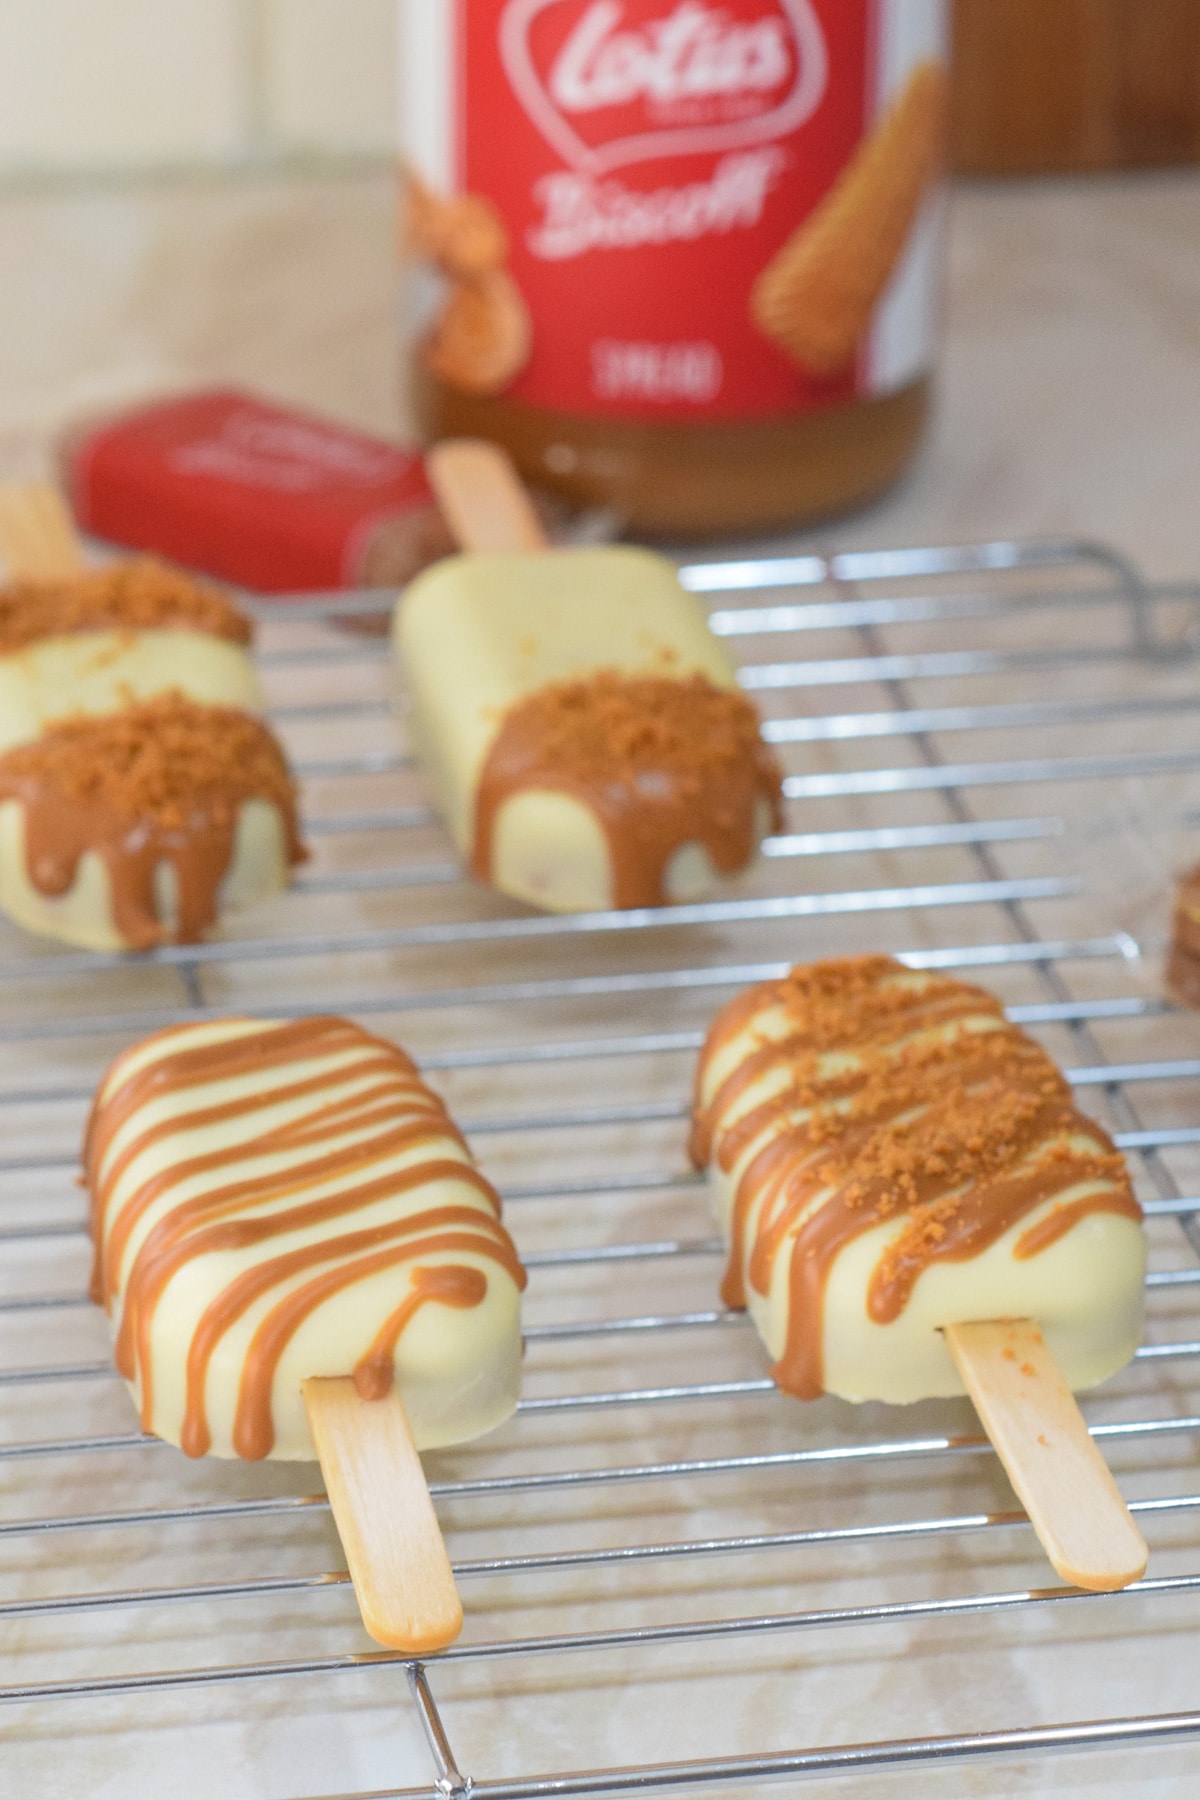 Lotus biscoff cakesicles (biscoff spread cake pop popsicles) on wire rack